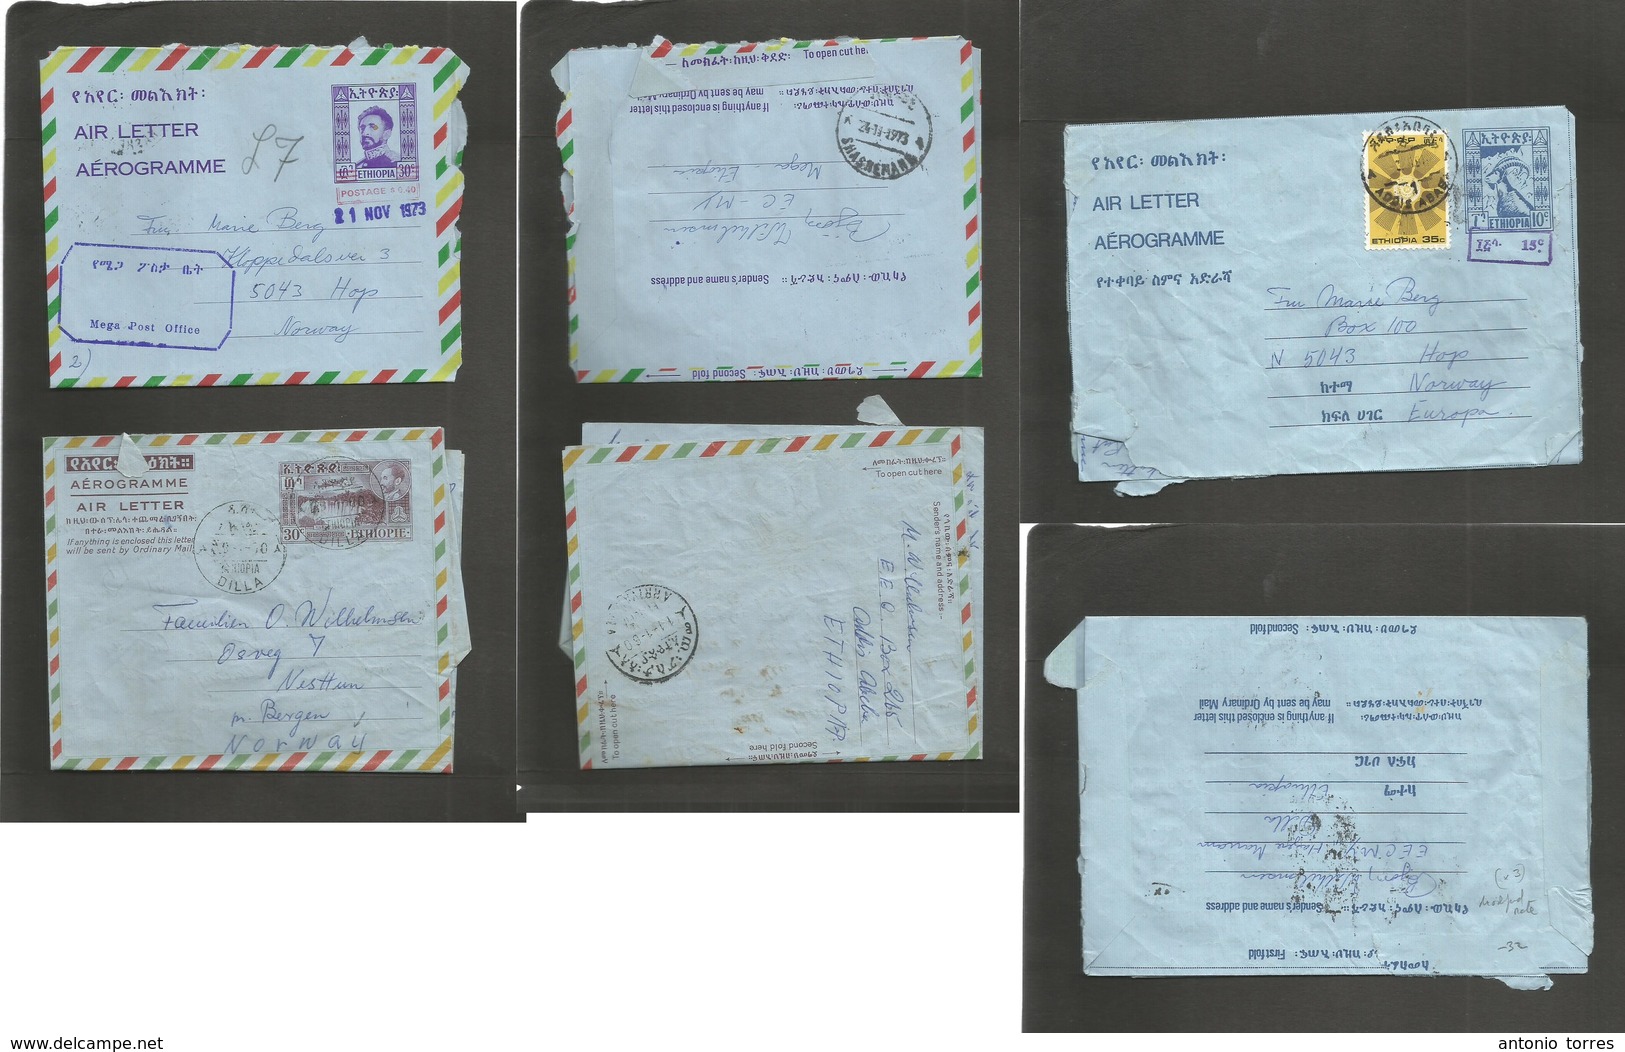 Ethiopia. 1960-81. 3 Diff Stationary Airletter Sheets With Ovpts, Town Name, Adtl Frkg Good Comercial Usages Trip. Mega  - Ethiopie